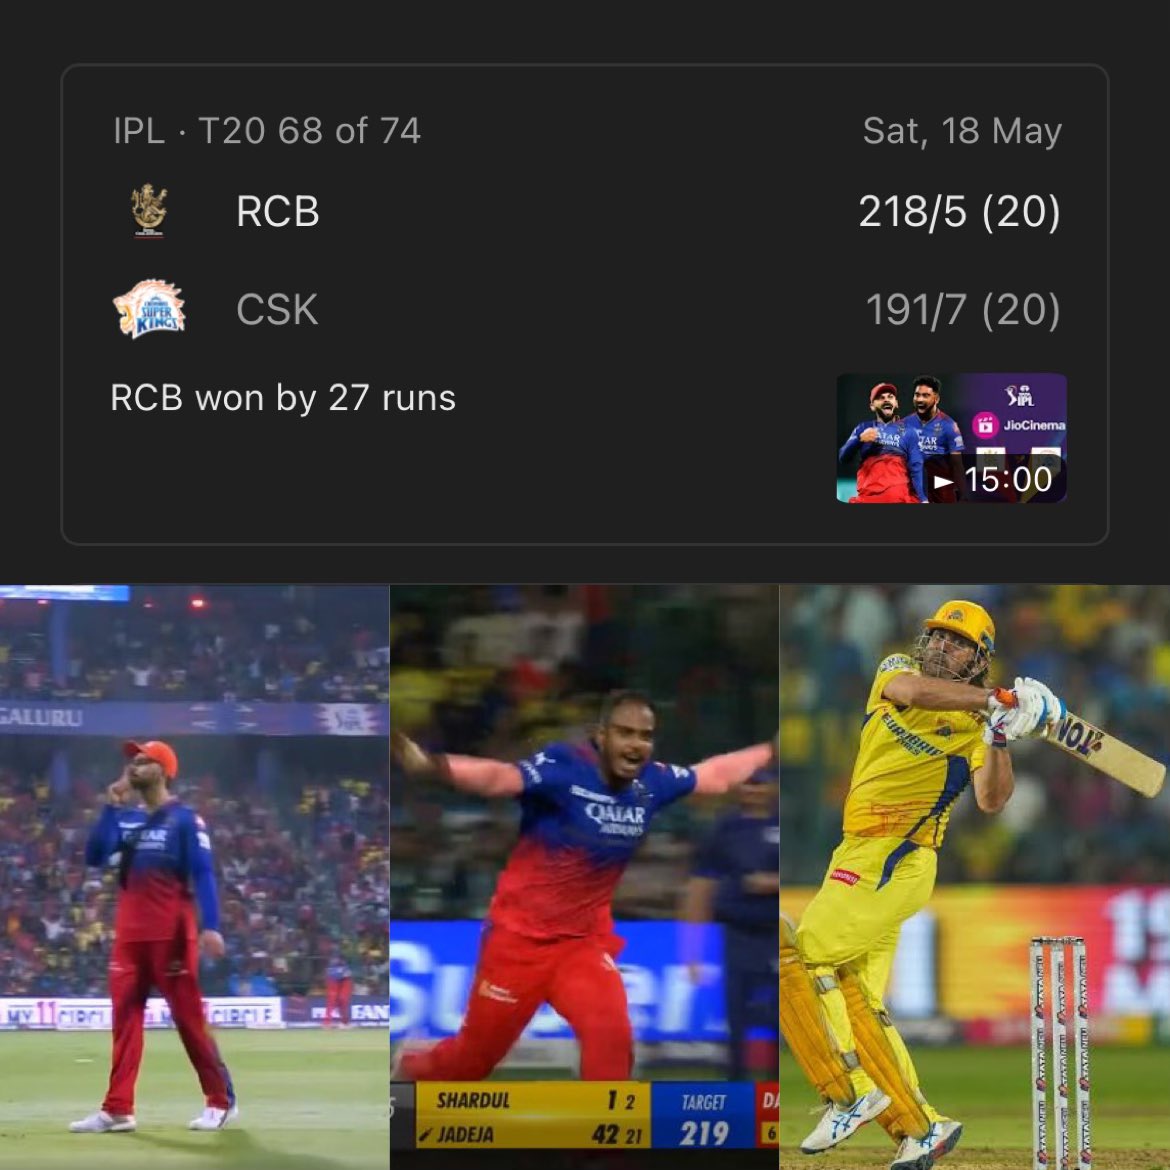 Honestly this is the worst IPL final ever played, csk vs rcb was way more intense then this, that game was bigger than final✍️